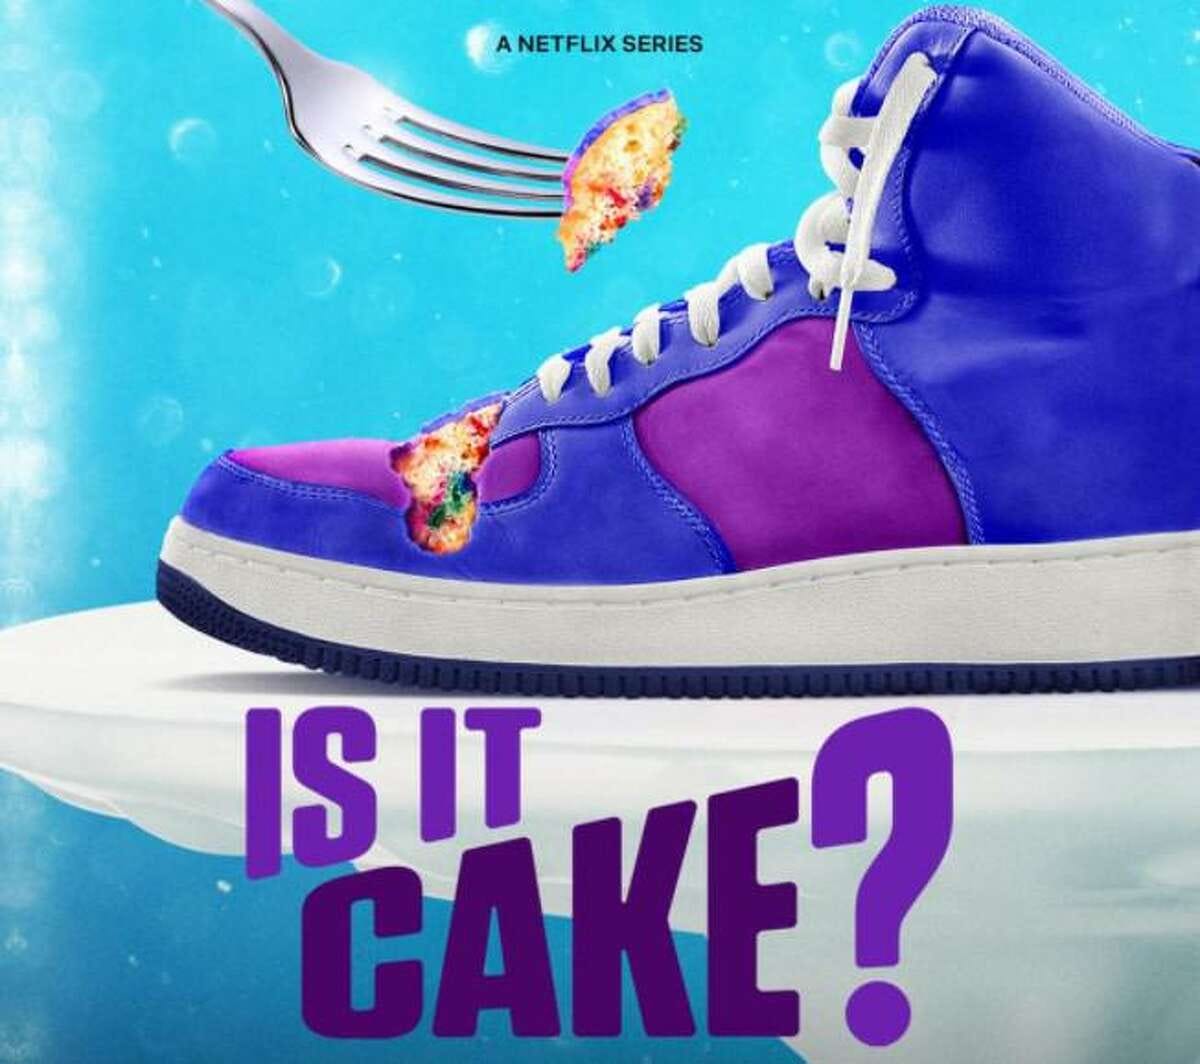 A purple sneaker on a turquoise background is not actually a sneaker but a cake. A fork has broken away some of the cake revealing the multicoloured inside sponge